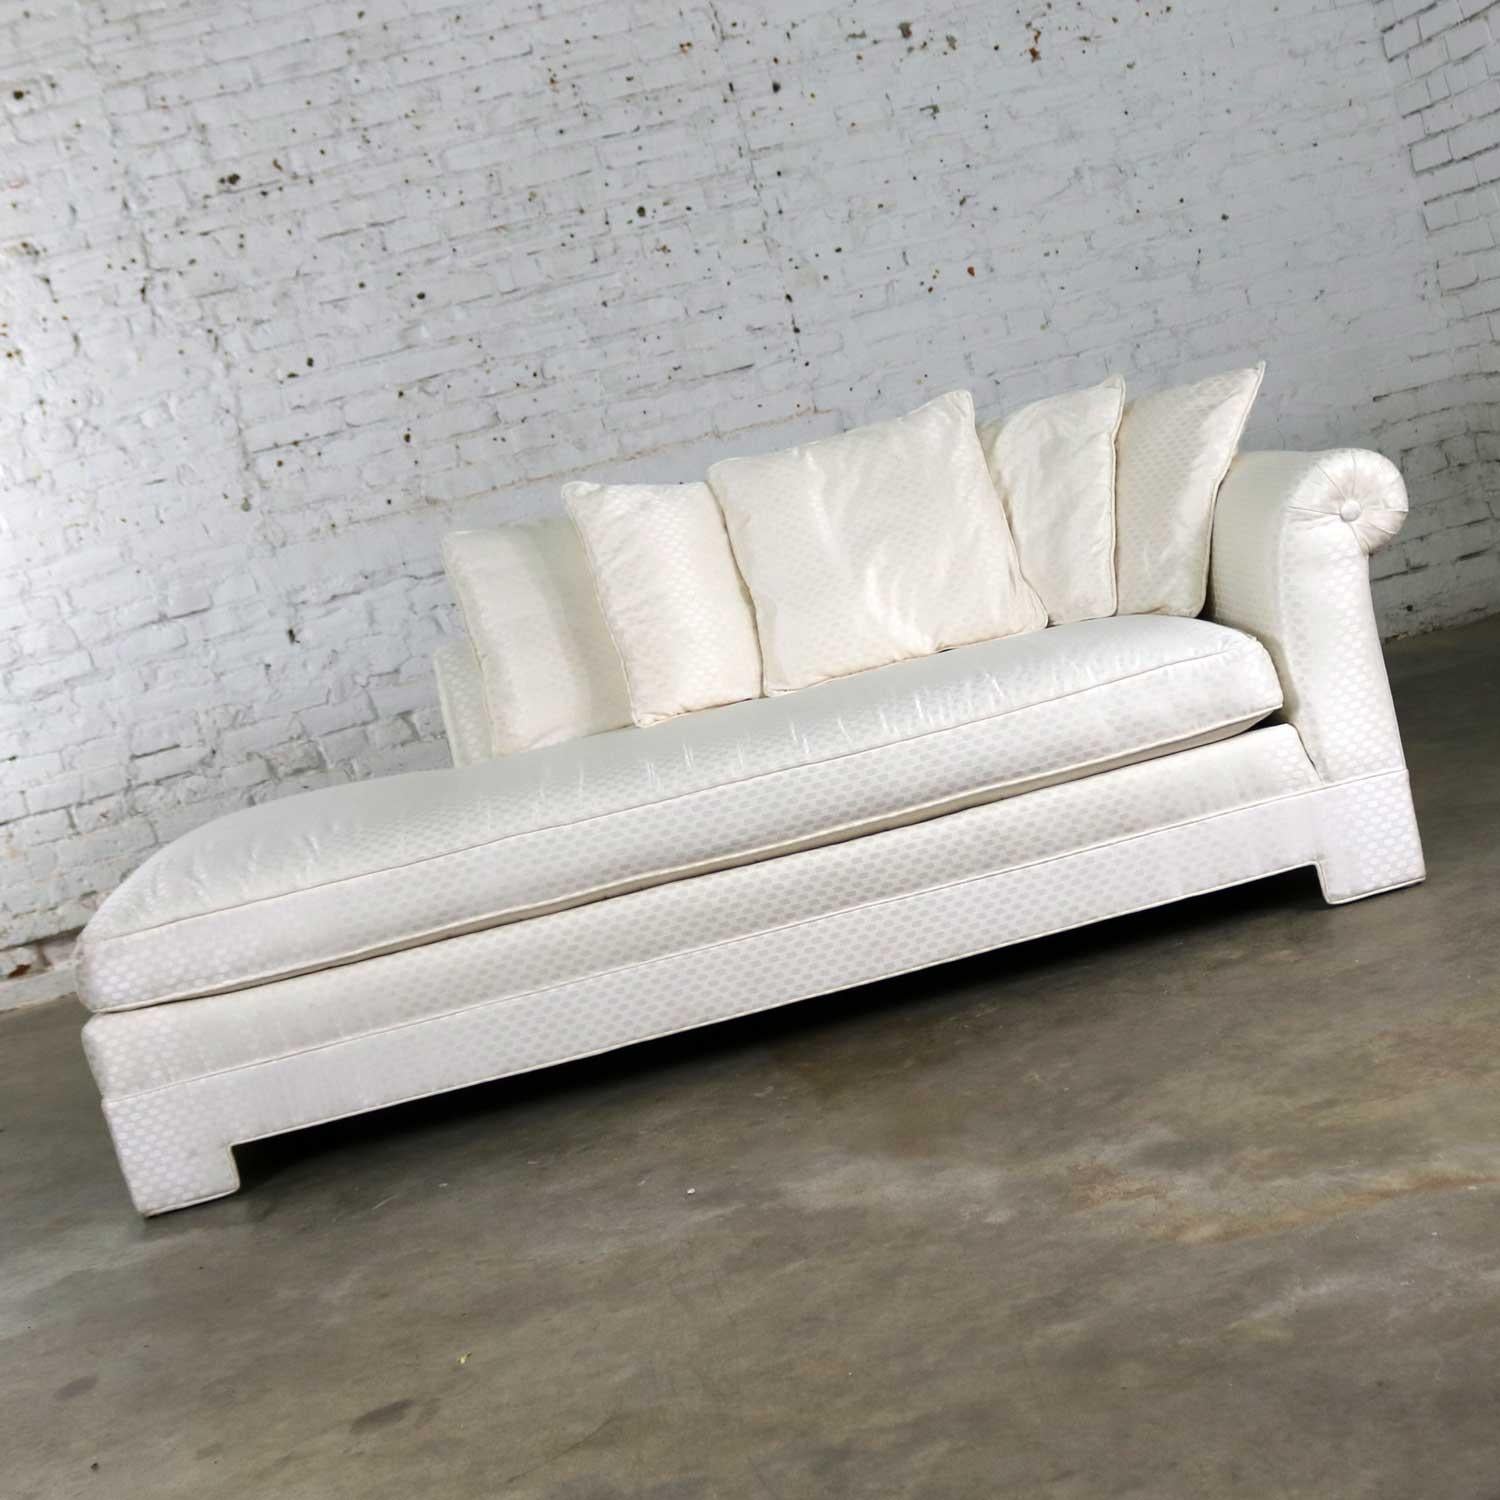 American White Art Deco Hollywood Regency Chaise with Loose Pillows & Rolled Arm & Back